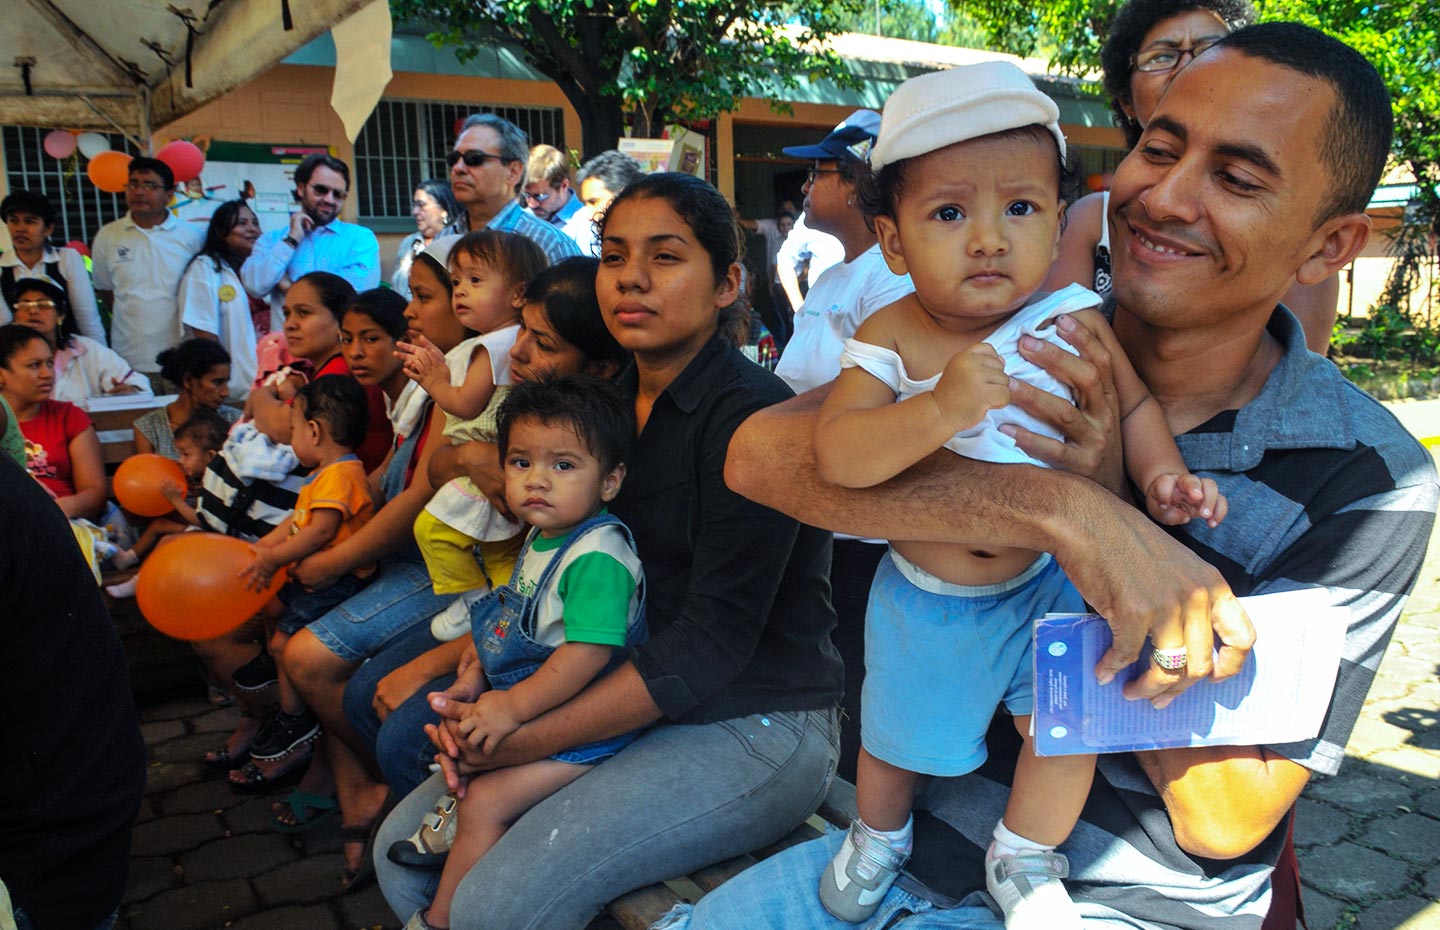 Father with his son during a vaccination session in Nicaragua - GAVI/2010/German. A Miranda